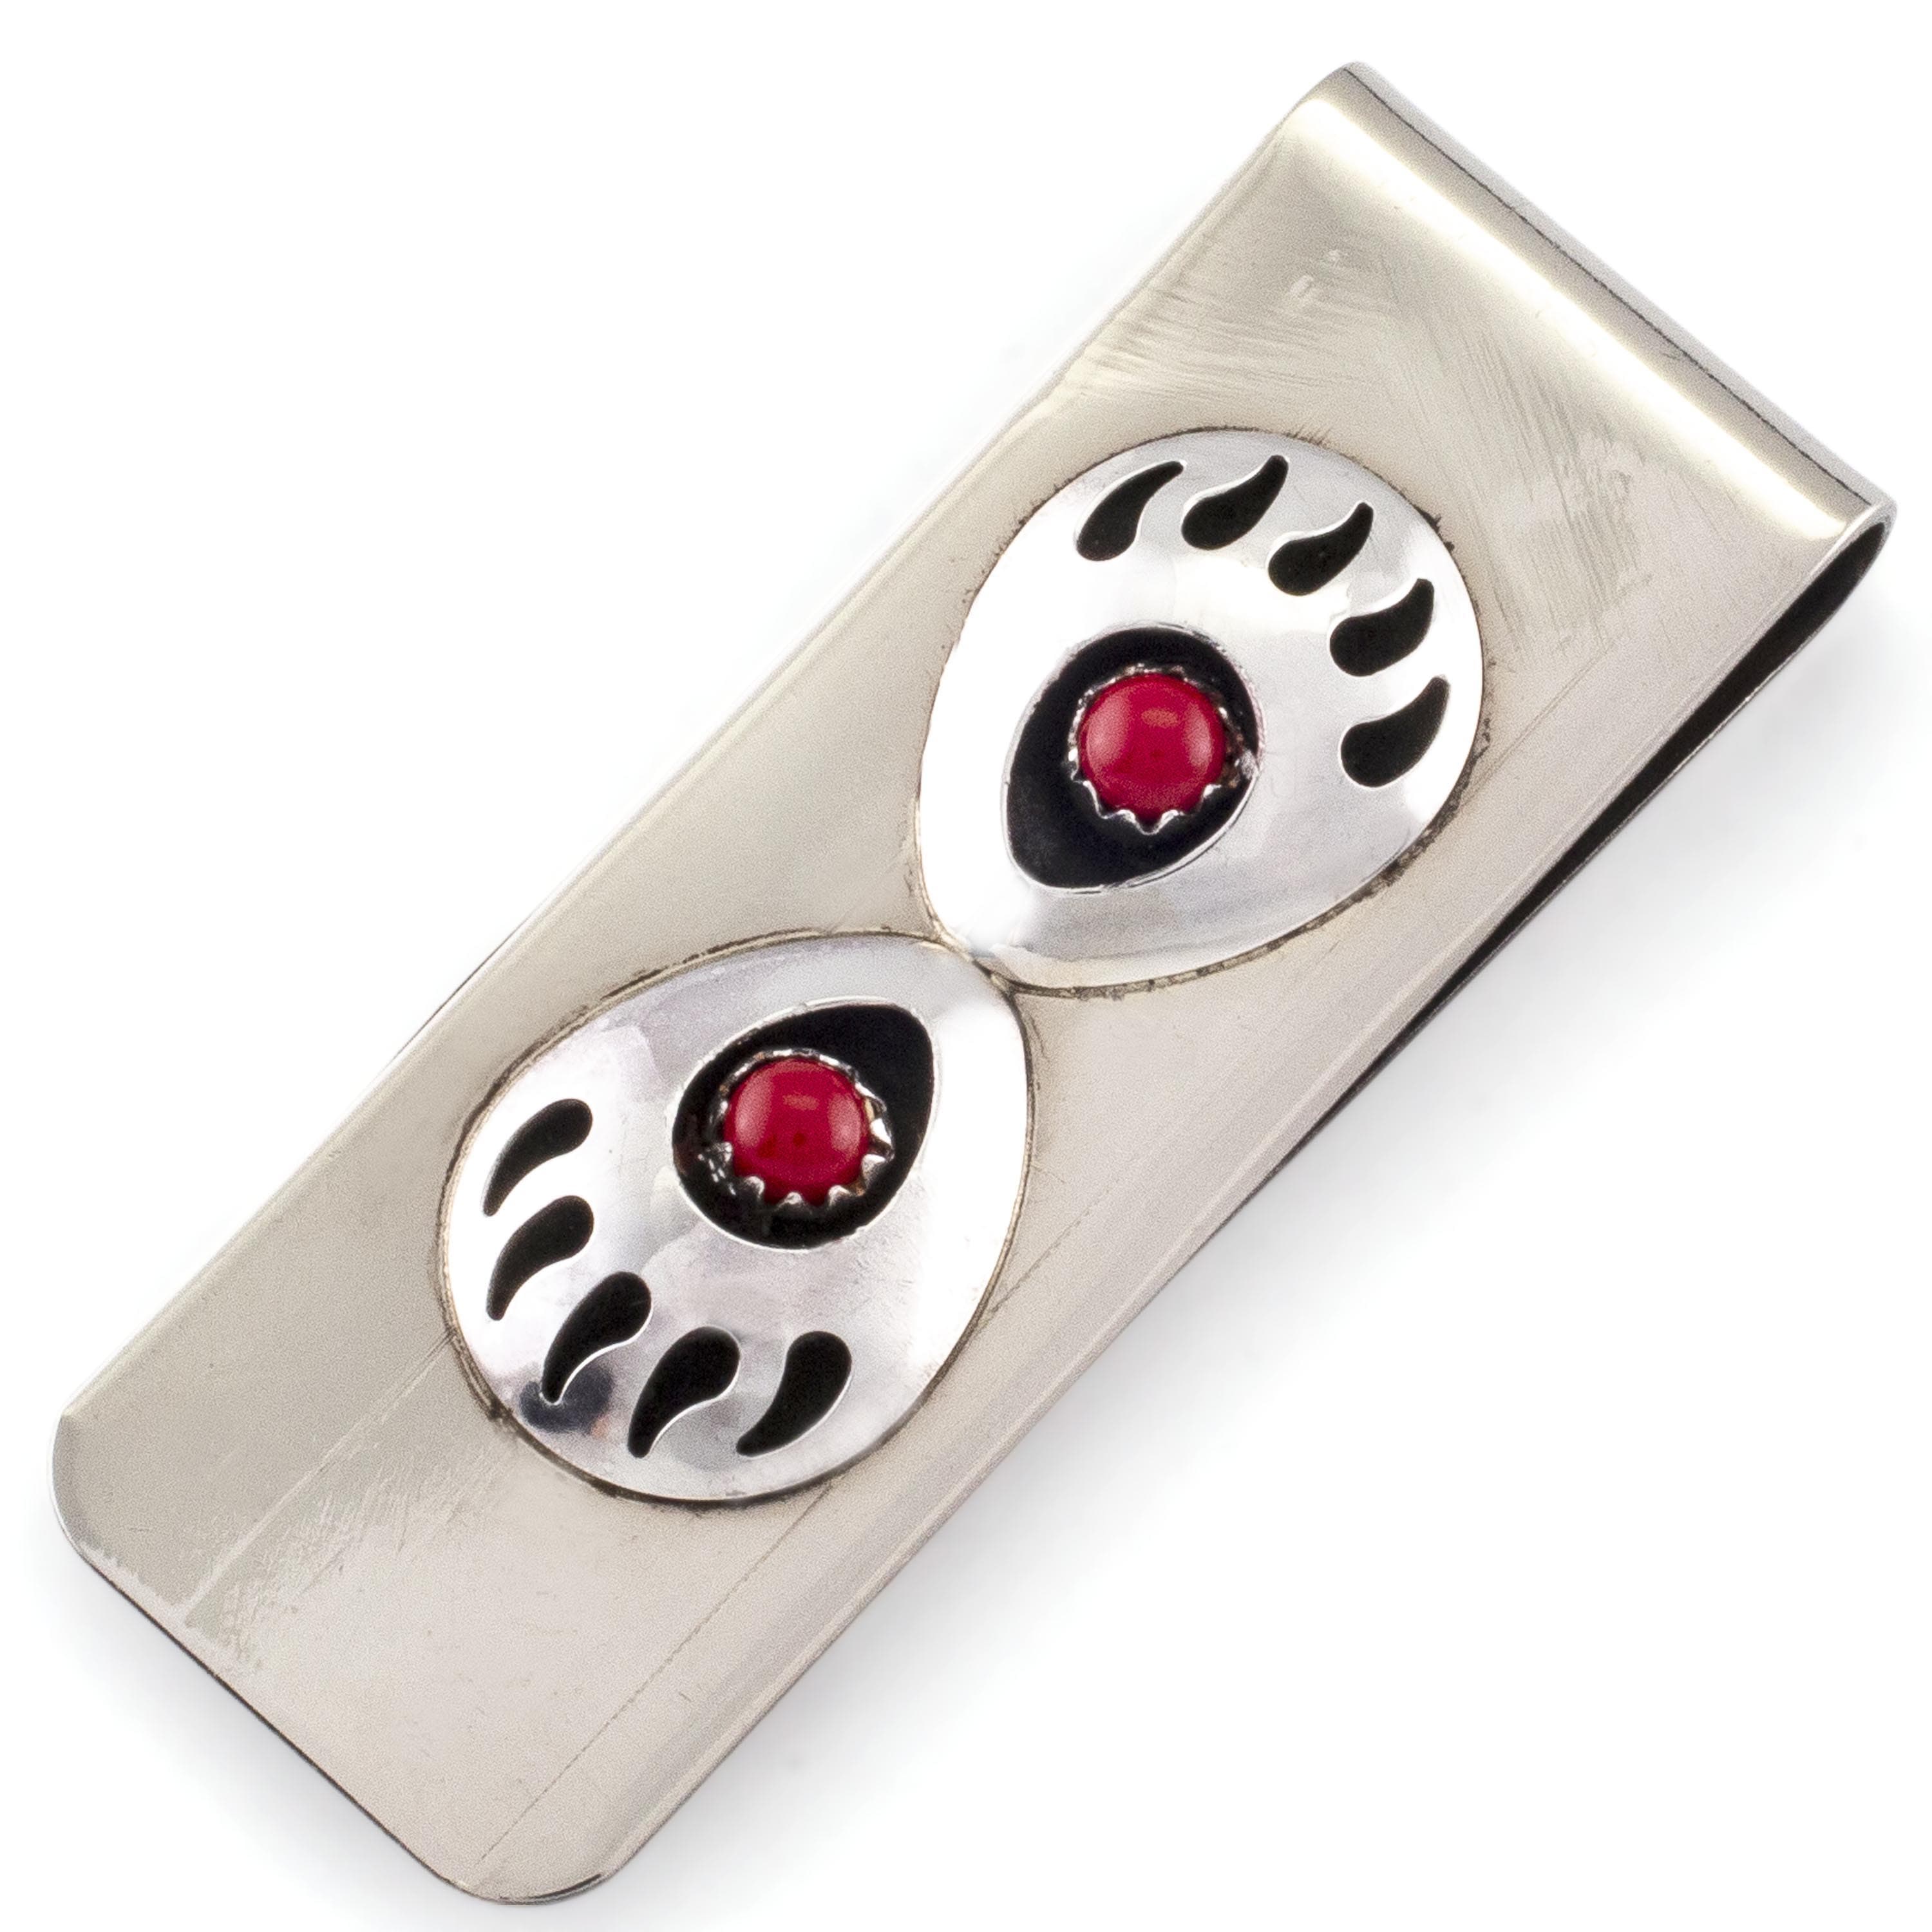 Kalifano Native American Jewelry Virginia Long Double Bear Paw wih Coral Inlay USA Native American Made 925 Sterling Silver Money Clip NAM90.002